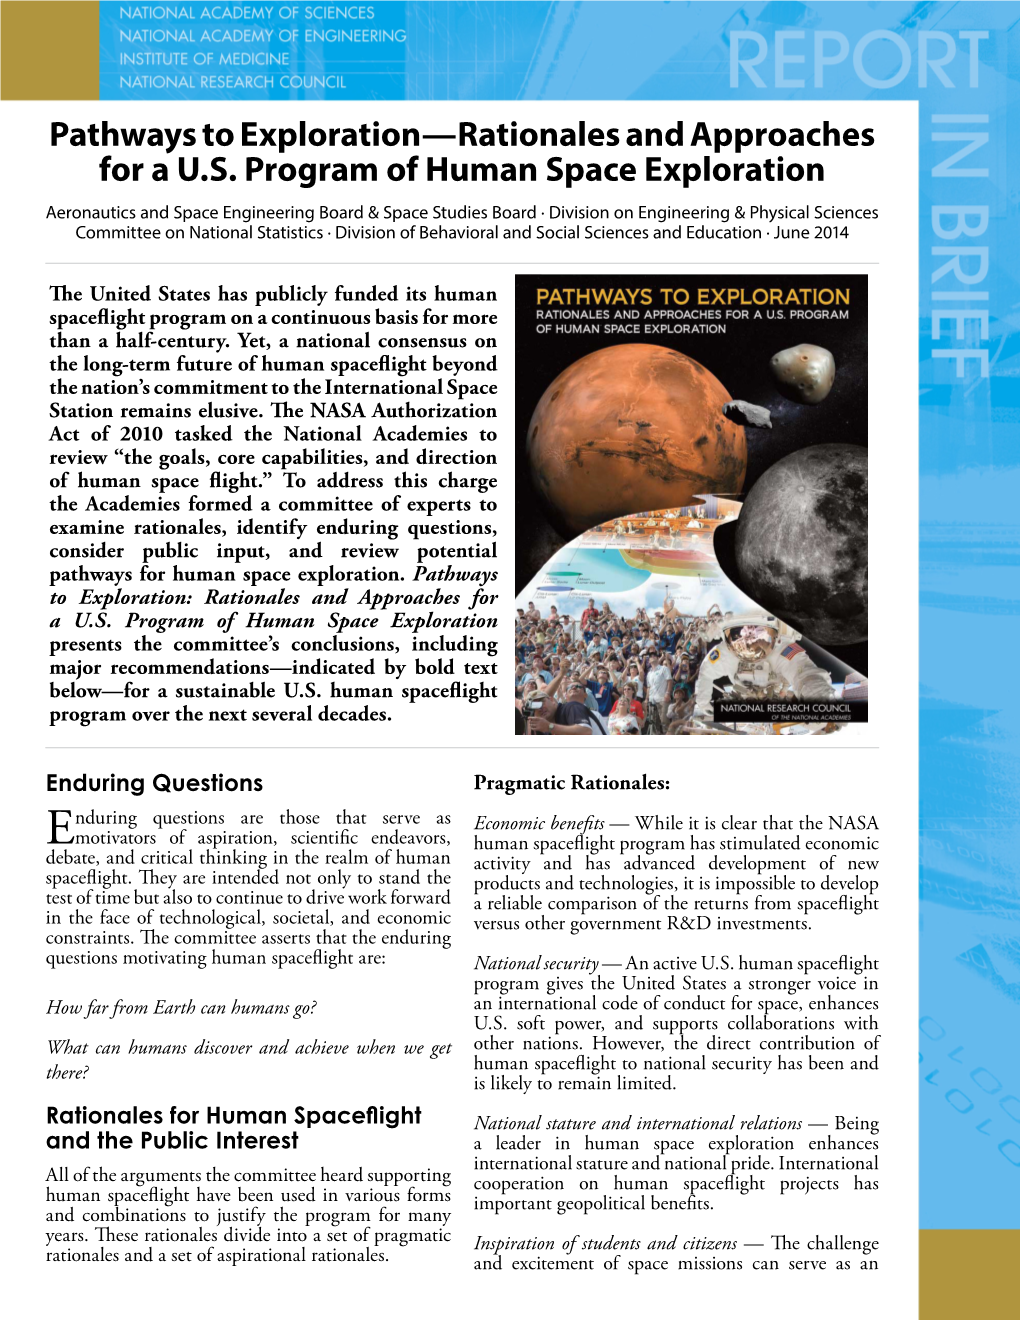 Pathways to Exploration—Rationales and Approaches for a U.S. Program